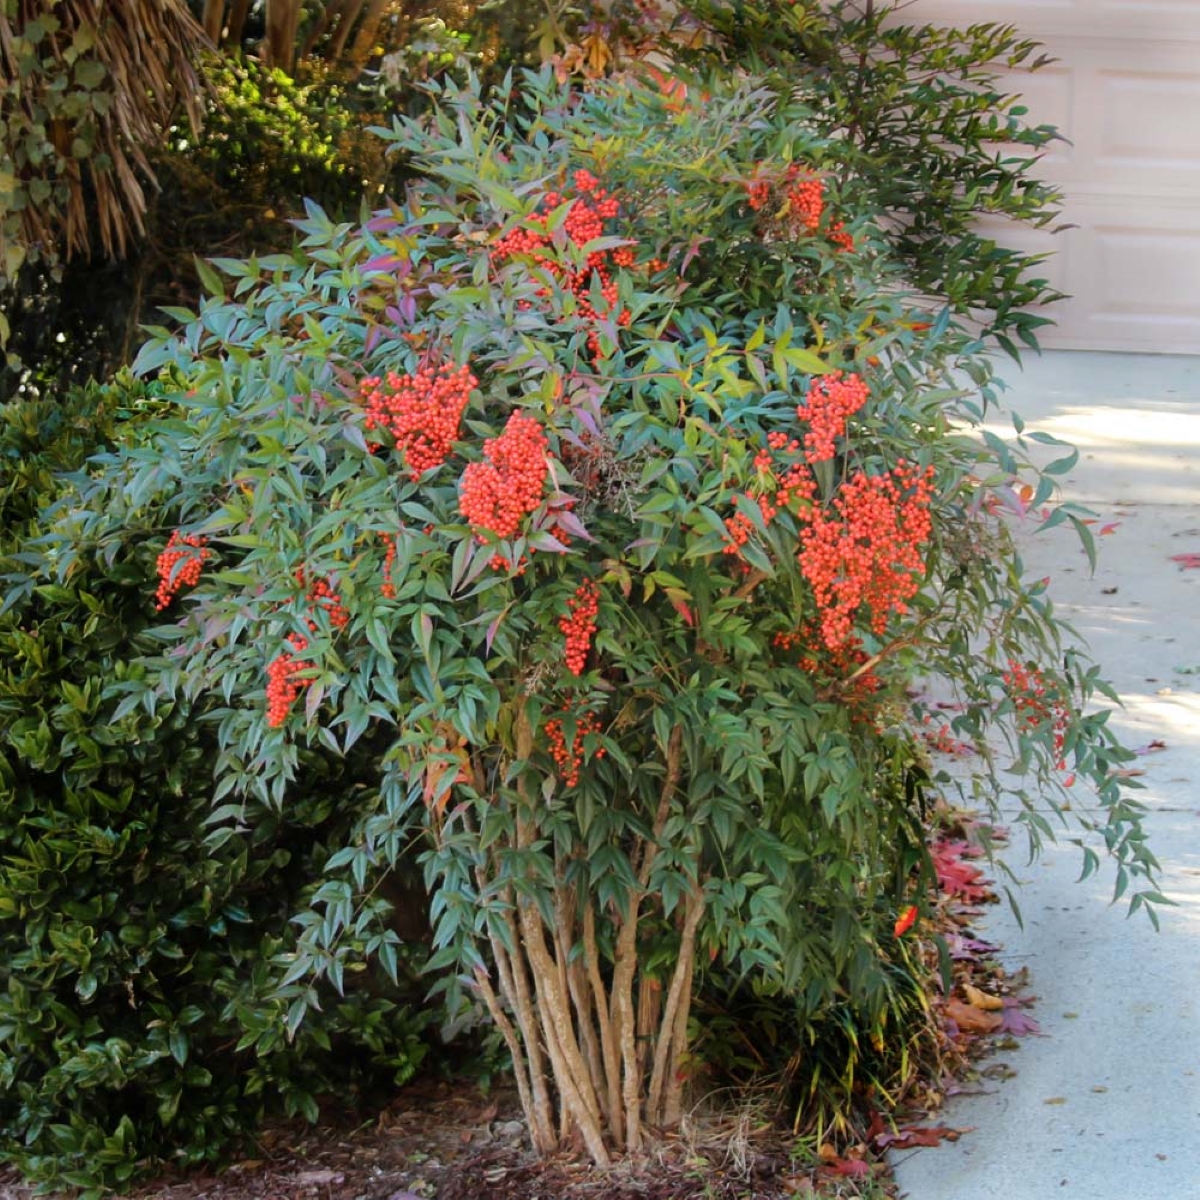 Nandina sacred bamboo plant with red berries